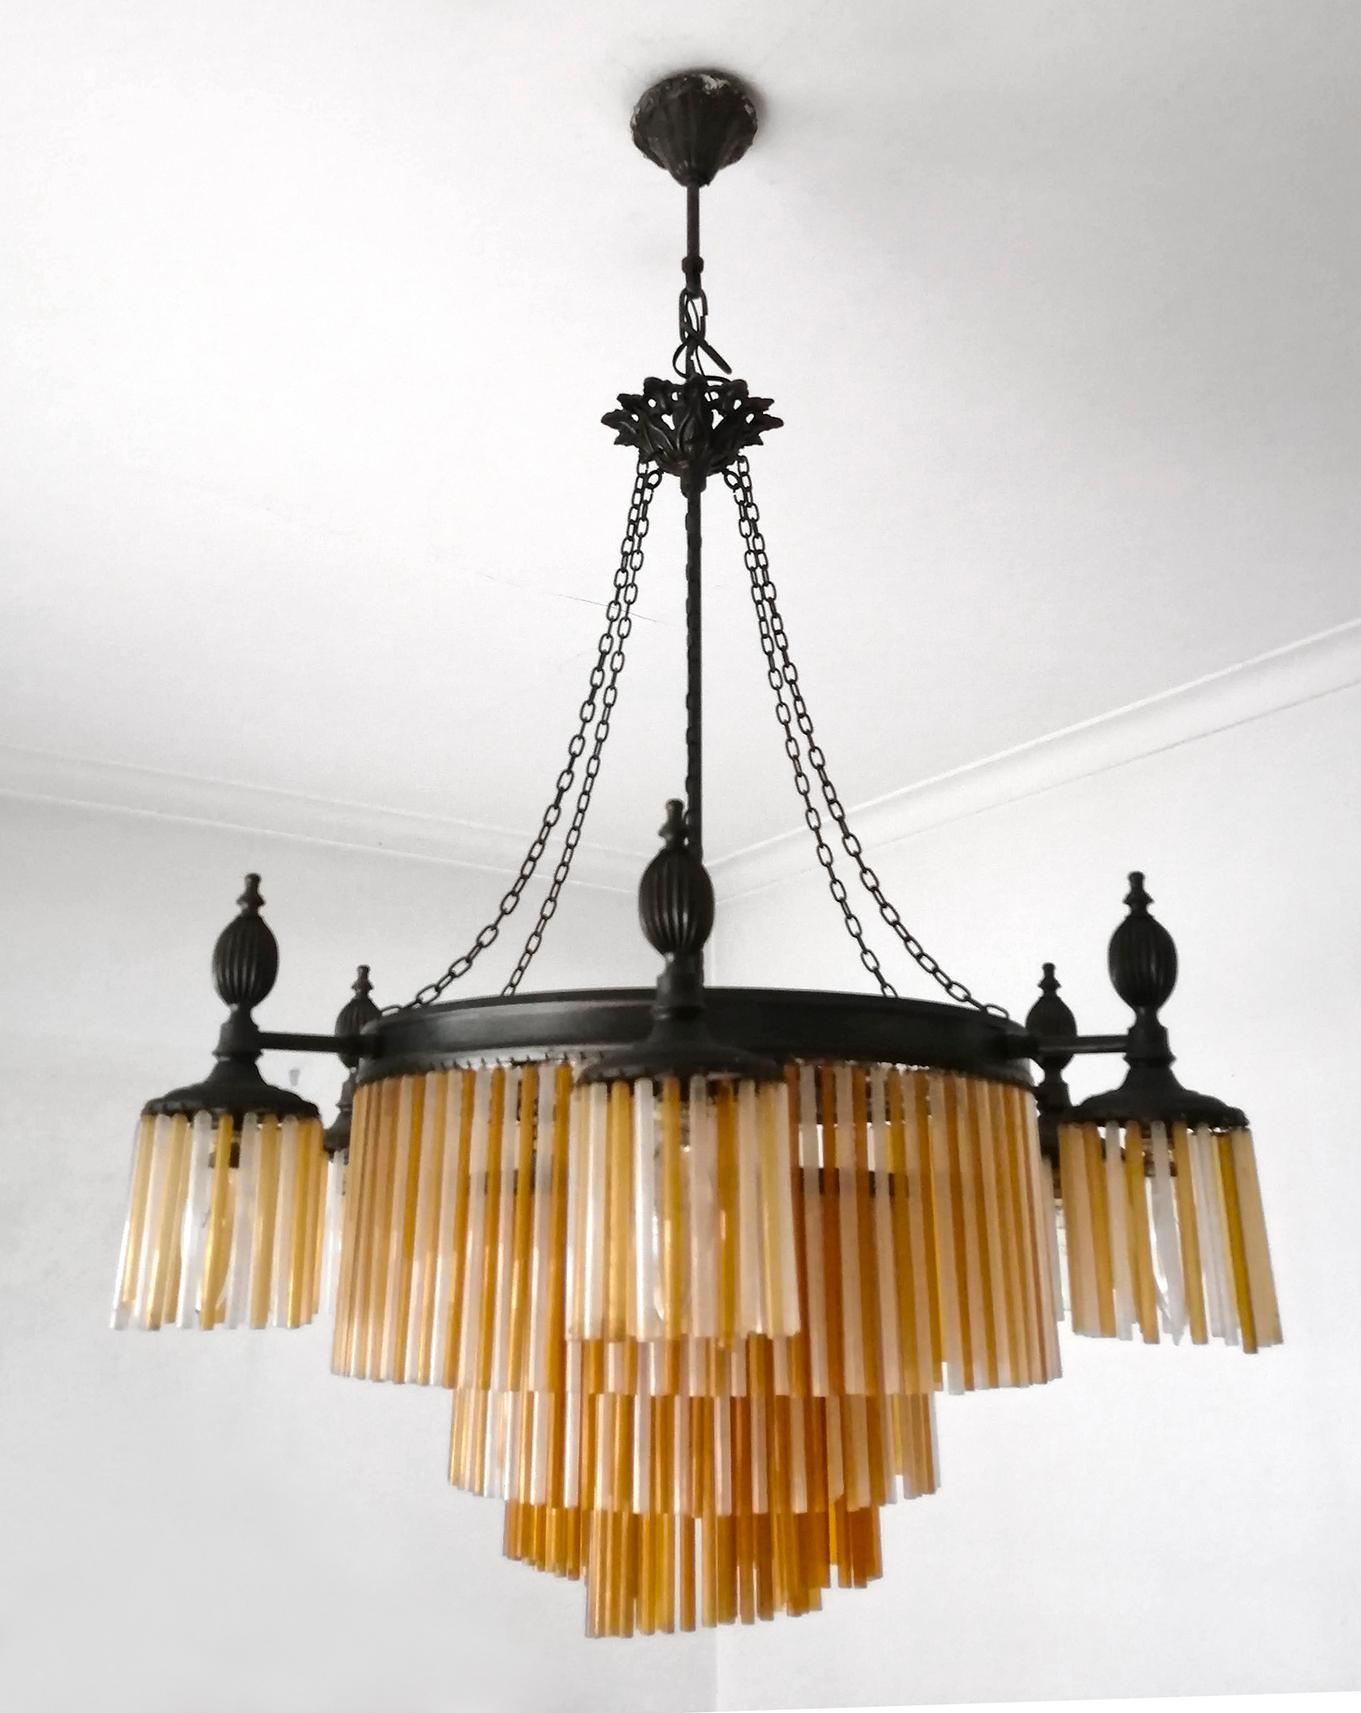 20th Century French Art Nouveau and Art Deco Amber and Clear Glass Straws 12-Light Chandelier For Sale